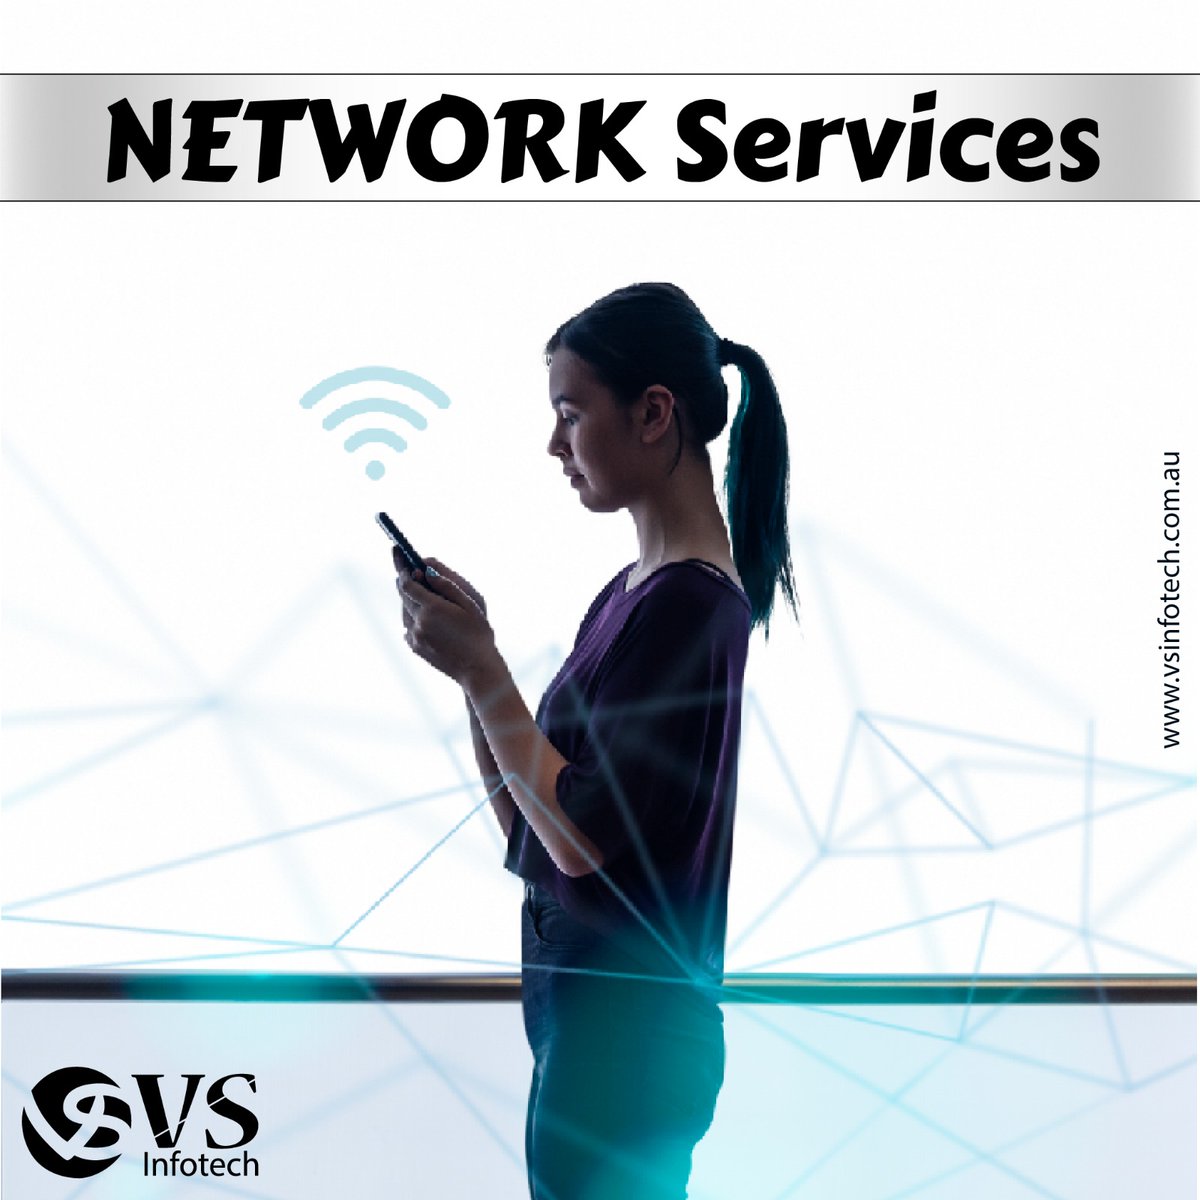 Get connected and stay ahead with our comprehensive network services. From robust IT infrastructure to reliable connectivity solutions, we'll ensure your business performs at its best. 
.
.
#networkservices #vsinfotechaustralia #ConnectivitySolutions